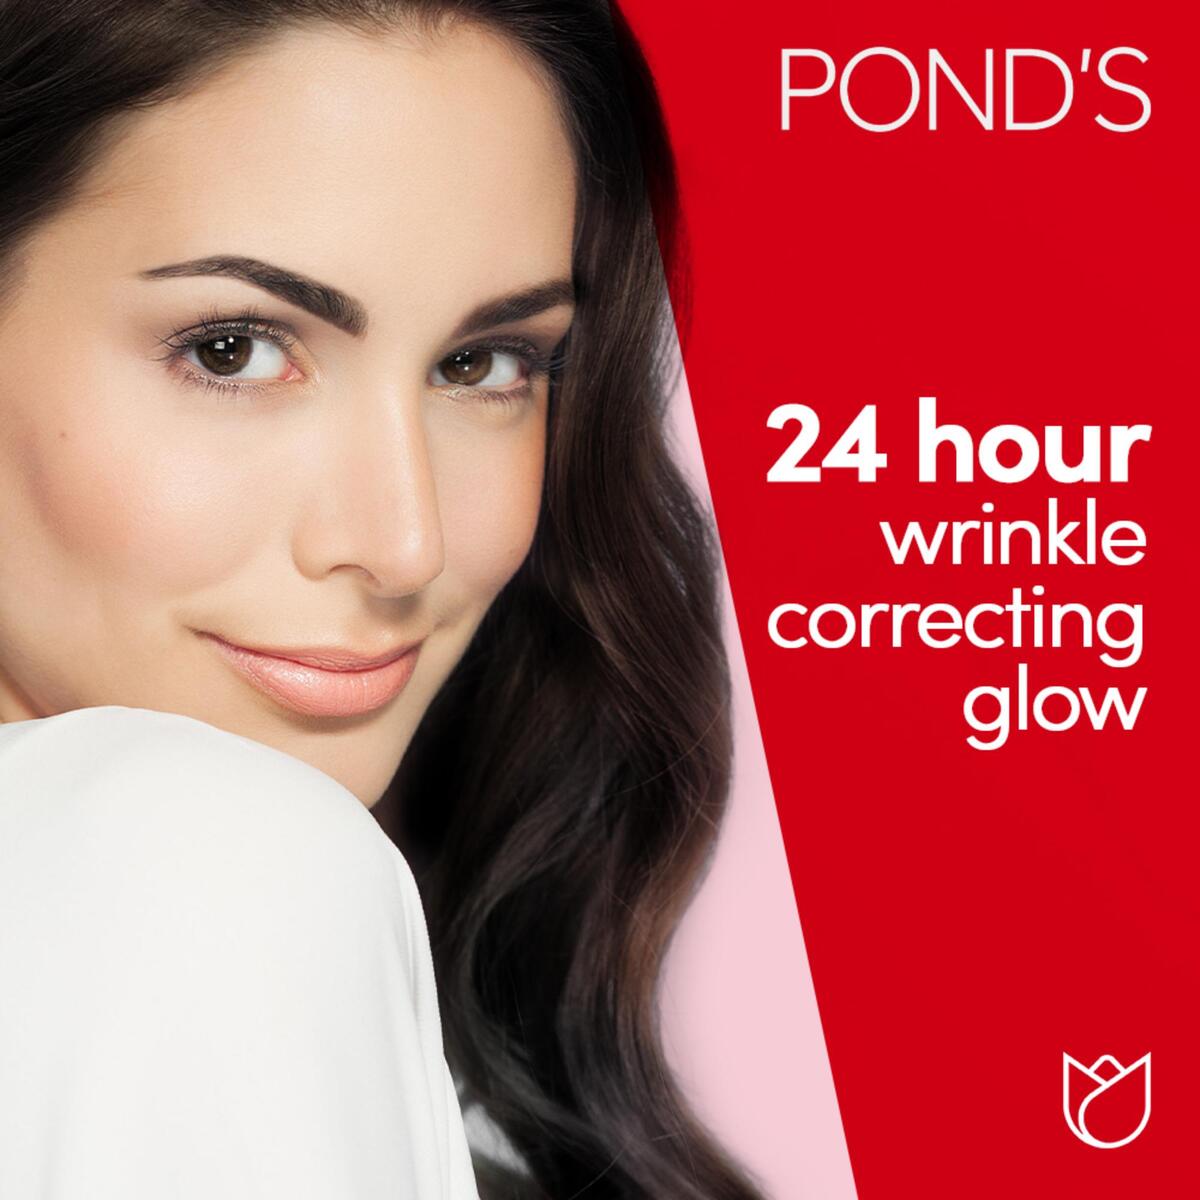 Pond's Age Miracle Day Cream SPF 18 50 g